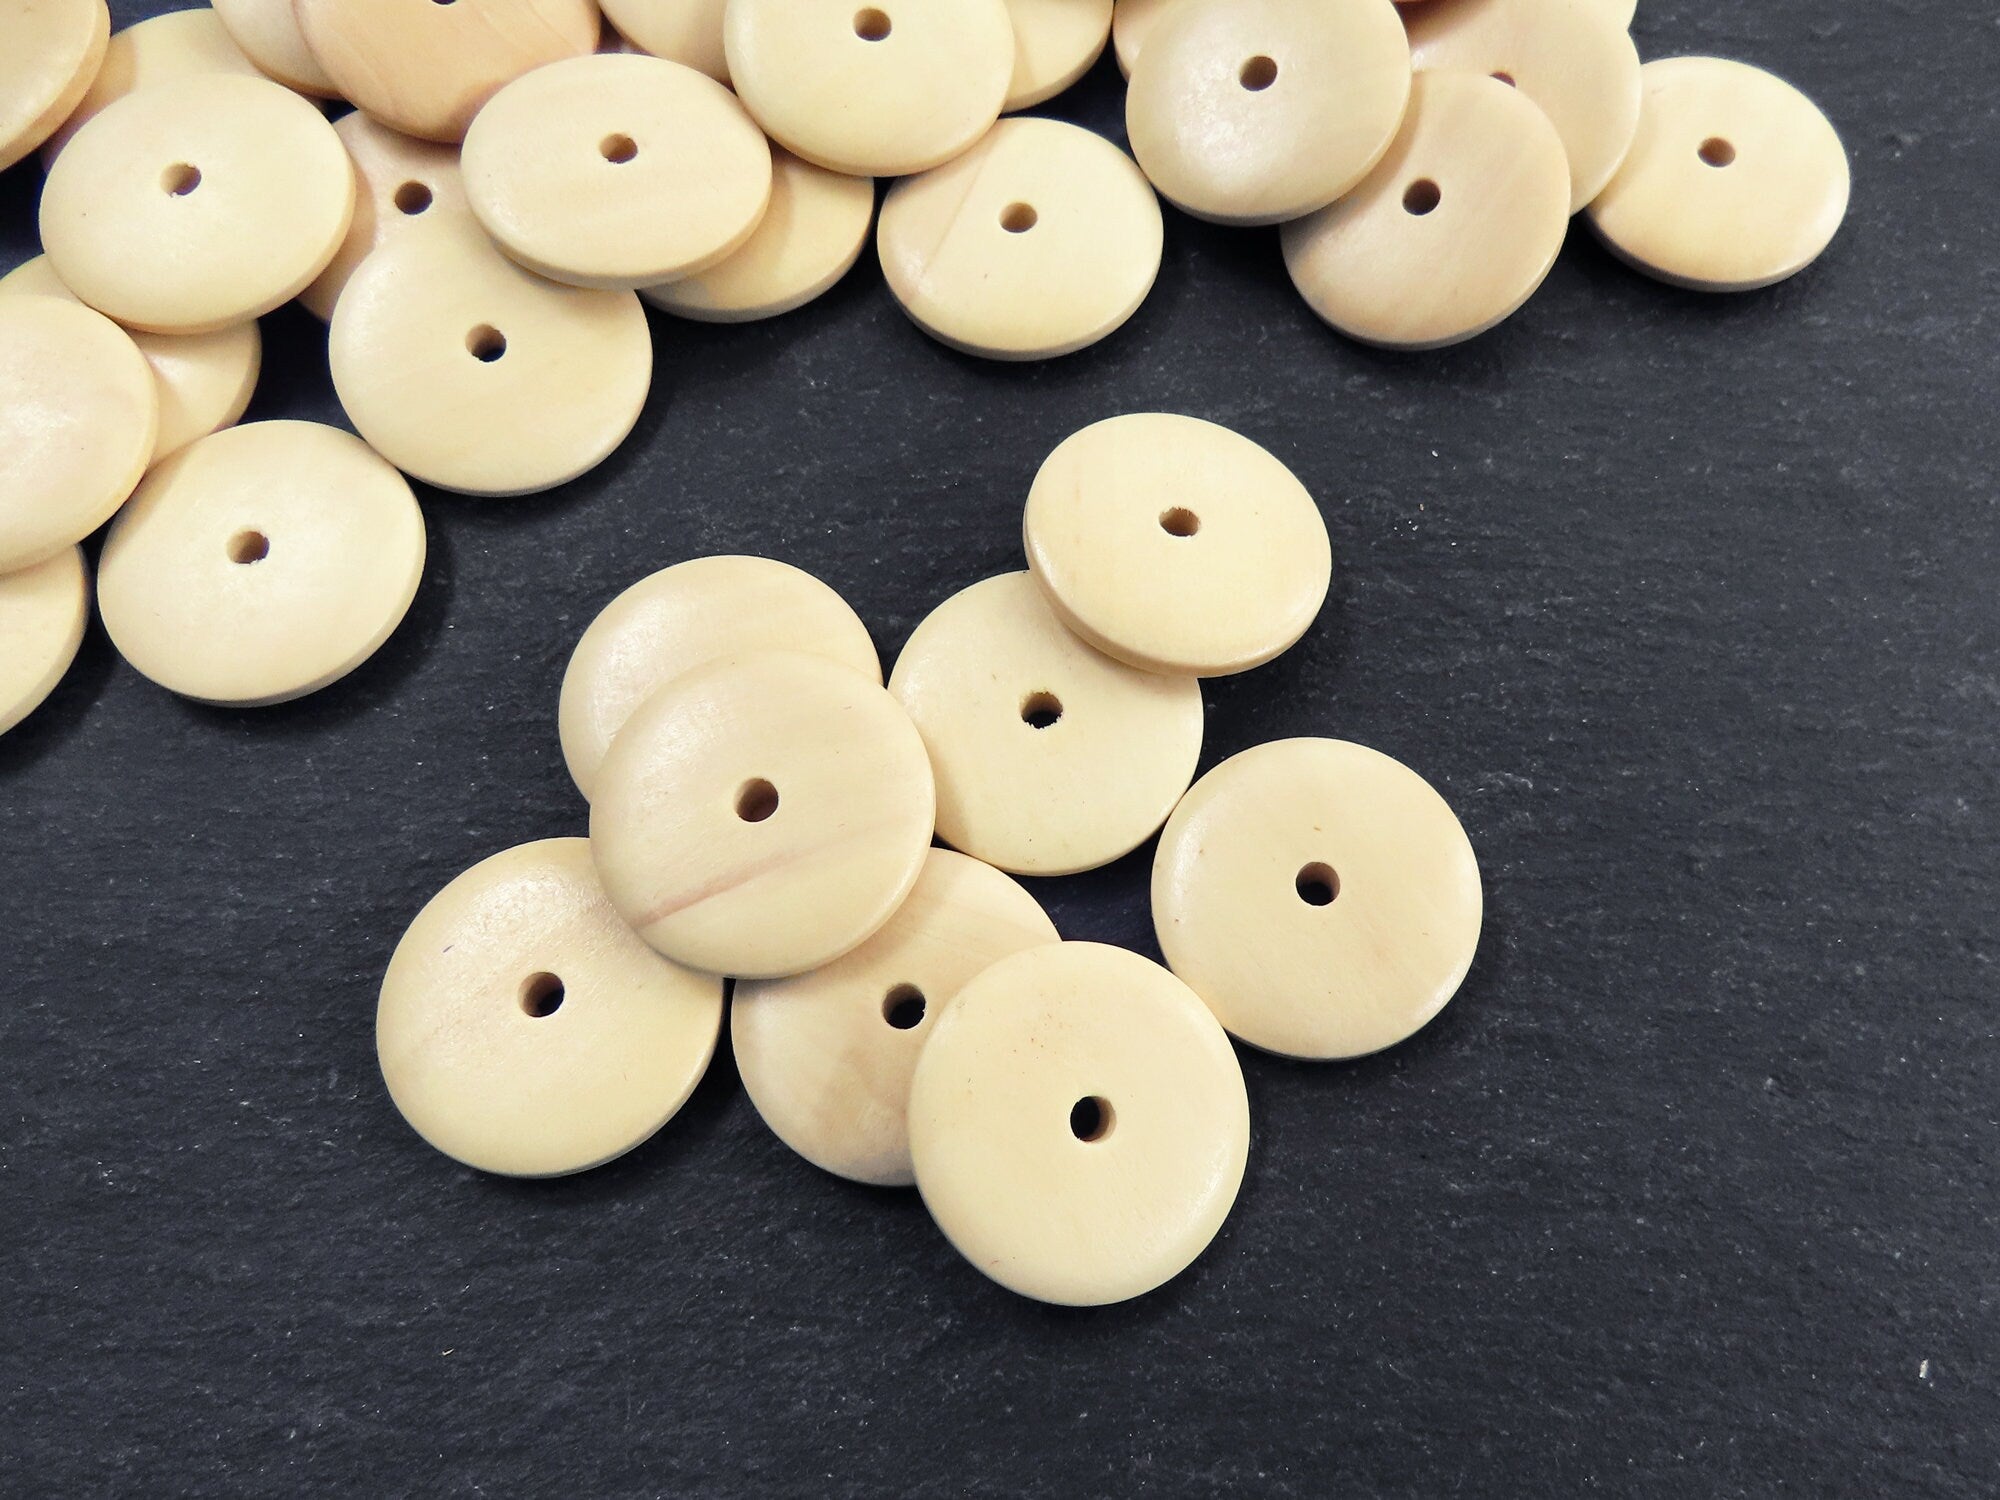  BigOtters Wood Beads, 25mm 1Inch Natural Round Wooden